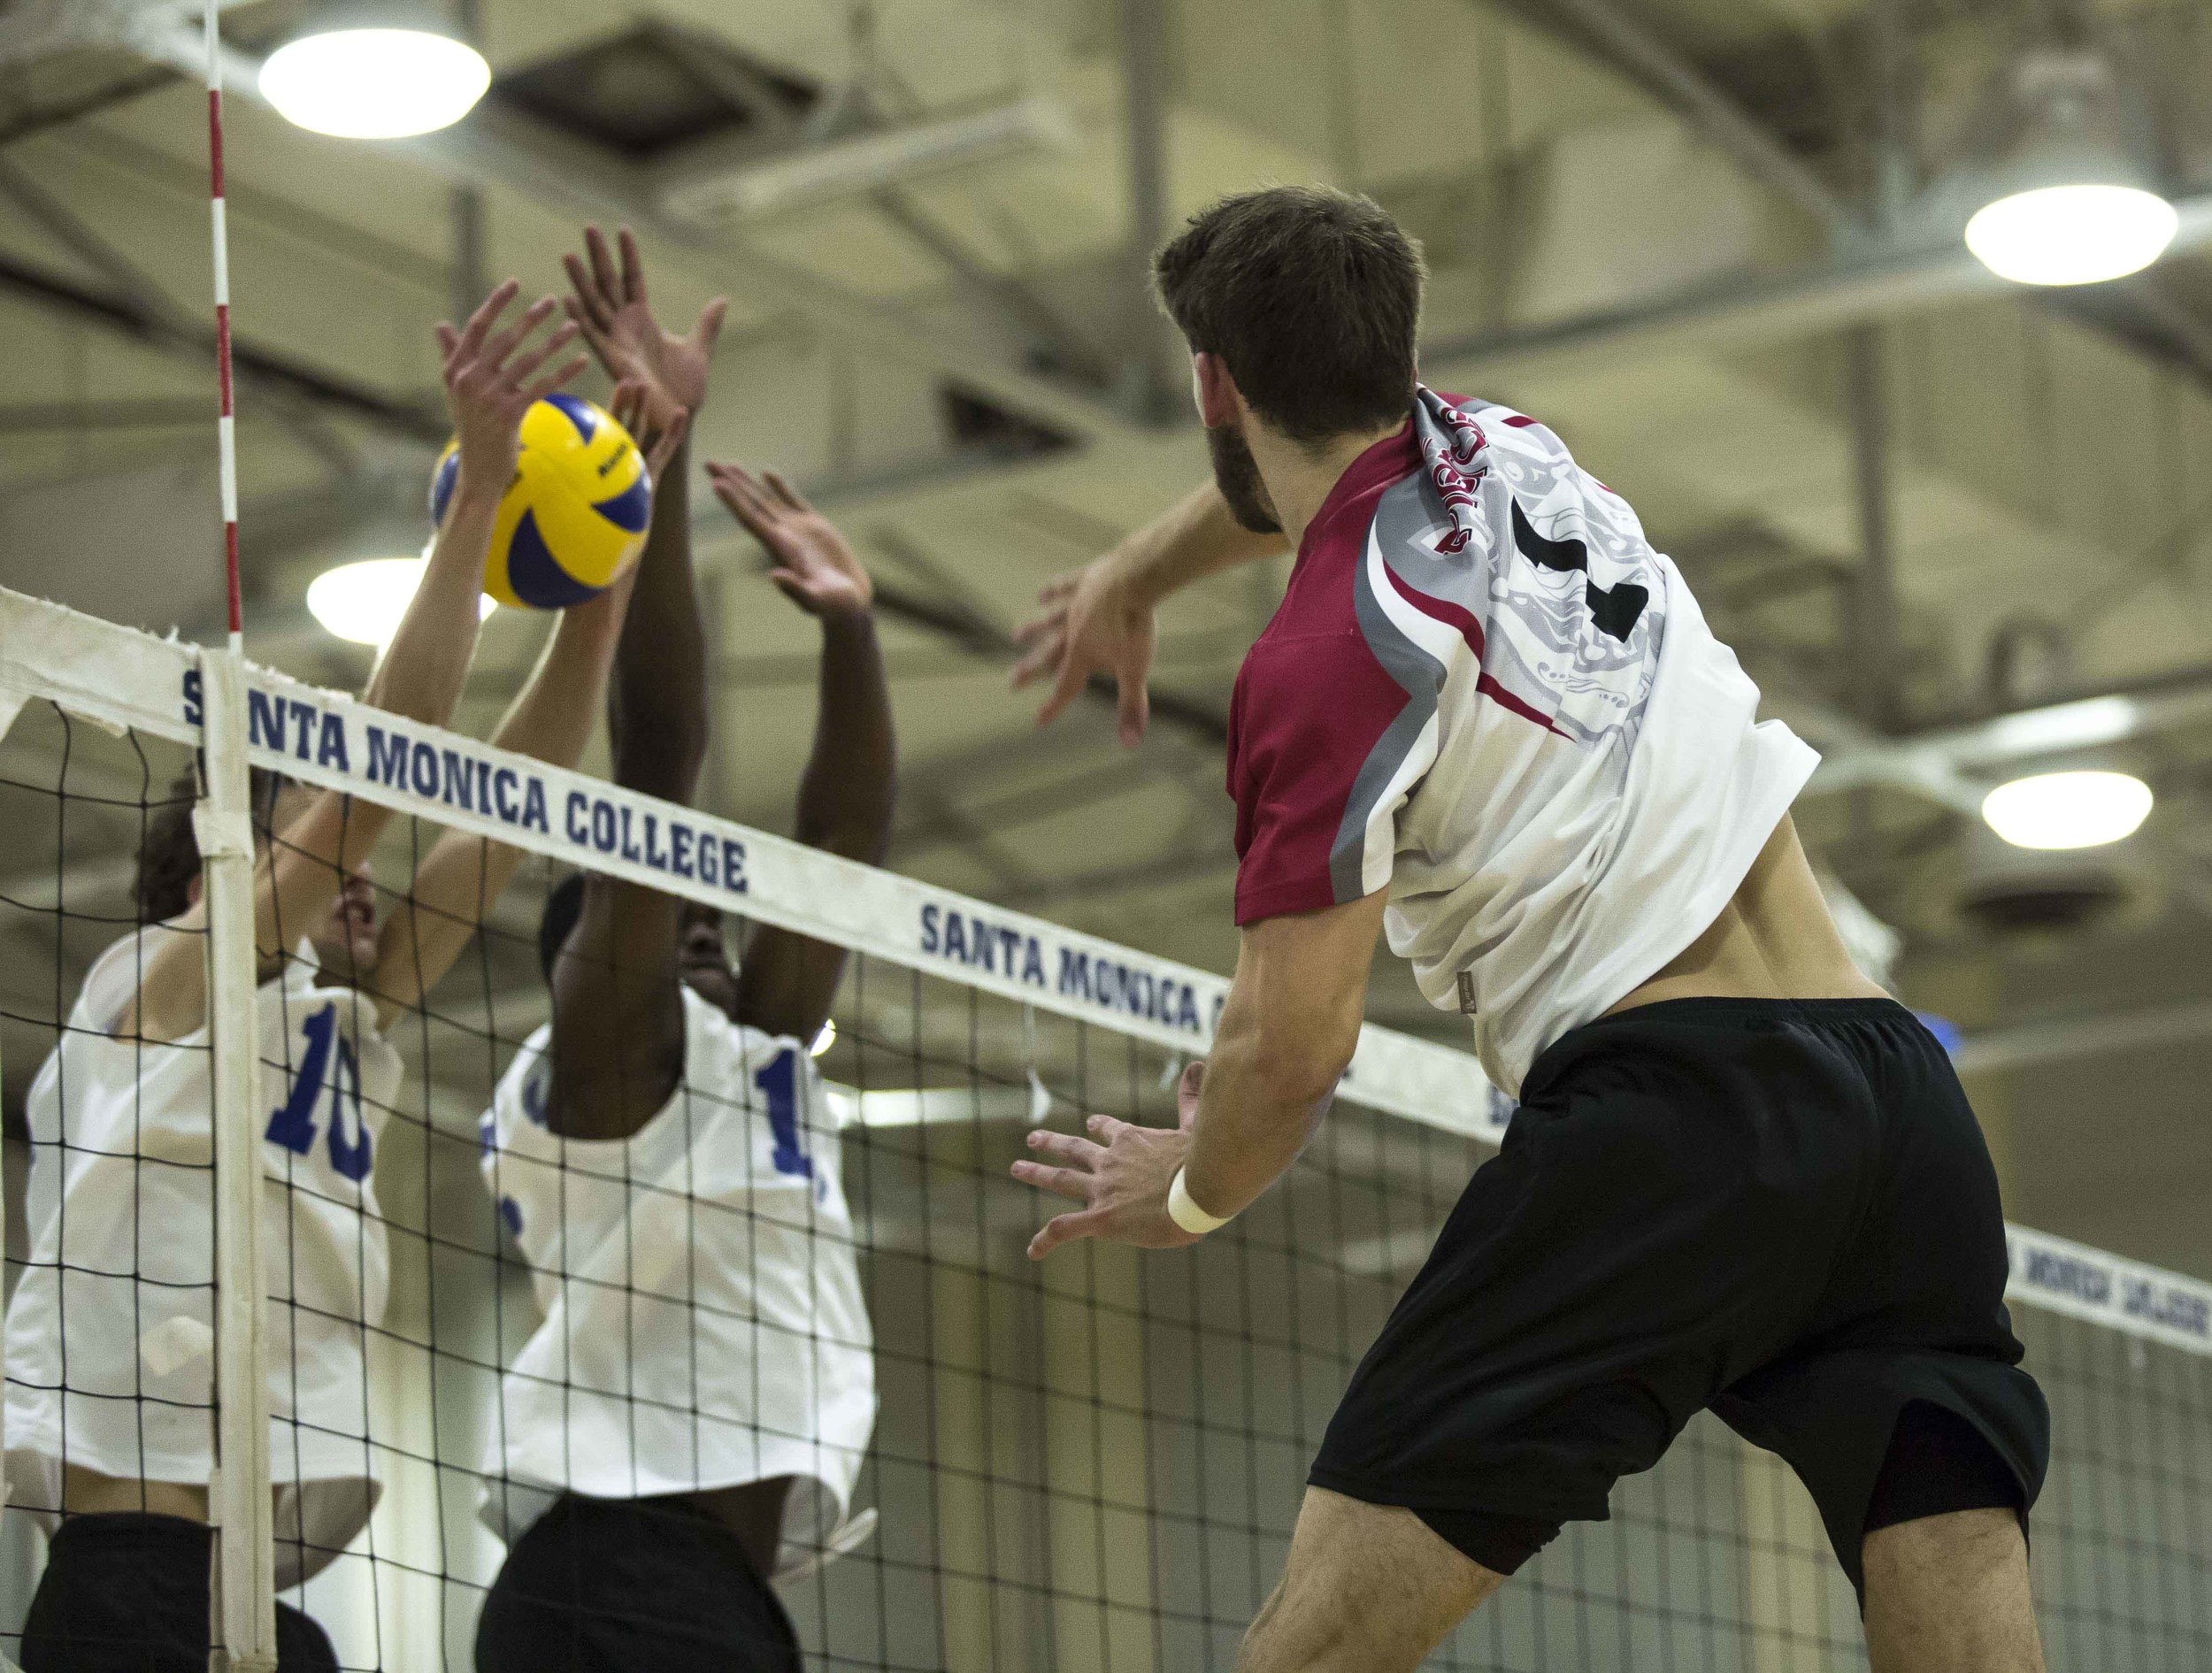  The Santa Monica Corsair defenders attempt to block the incoming spike by Pierce College Brahmas freshman opposite hitter Brandon Oswald (1, right) in the Santa Monica College gymnasium in Santa Monica Calif., on Wednesday March 1 2017. The Corsairs